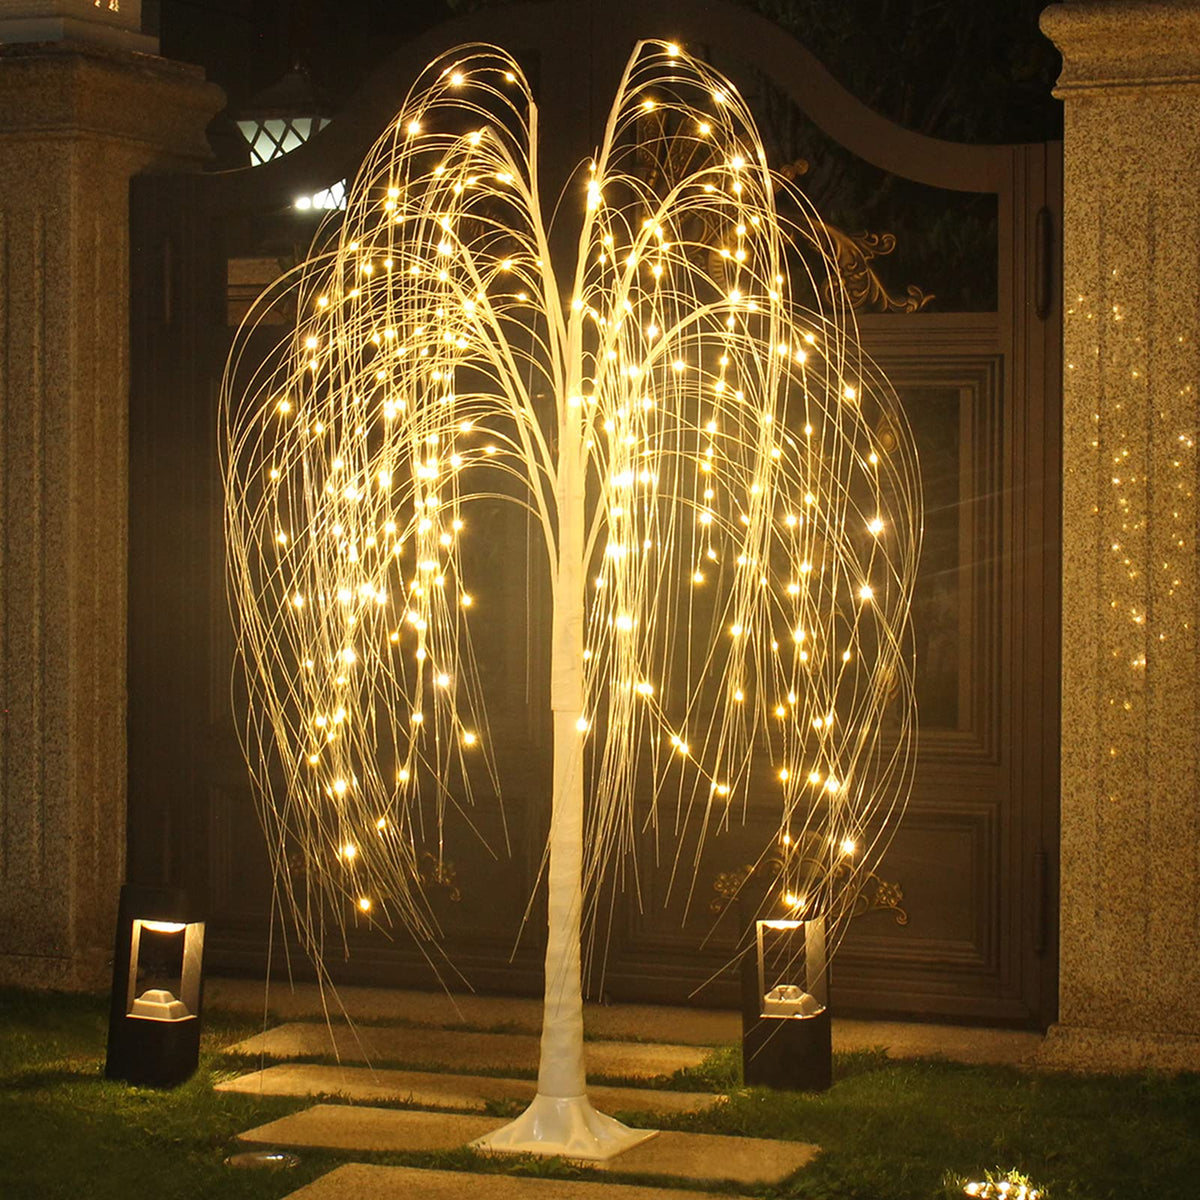 Set of 2 Prelit Christmas Tree, White Birch Tree with LED Lights Adjustable  Brightness, Artificial Twig Tree with Timer Waterproof for Outdoor Indoor  Yard Party Xmas Decor, Plug in, 5FT 6FT